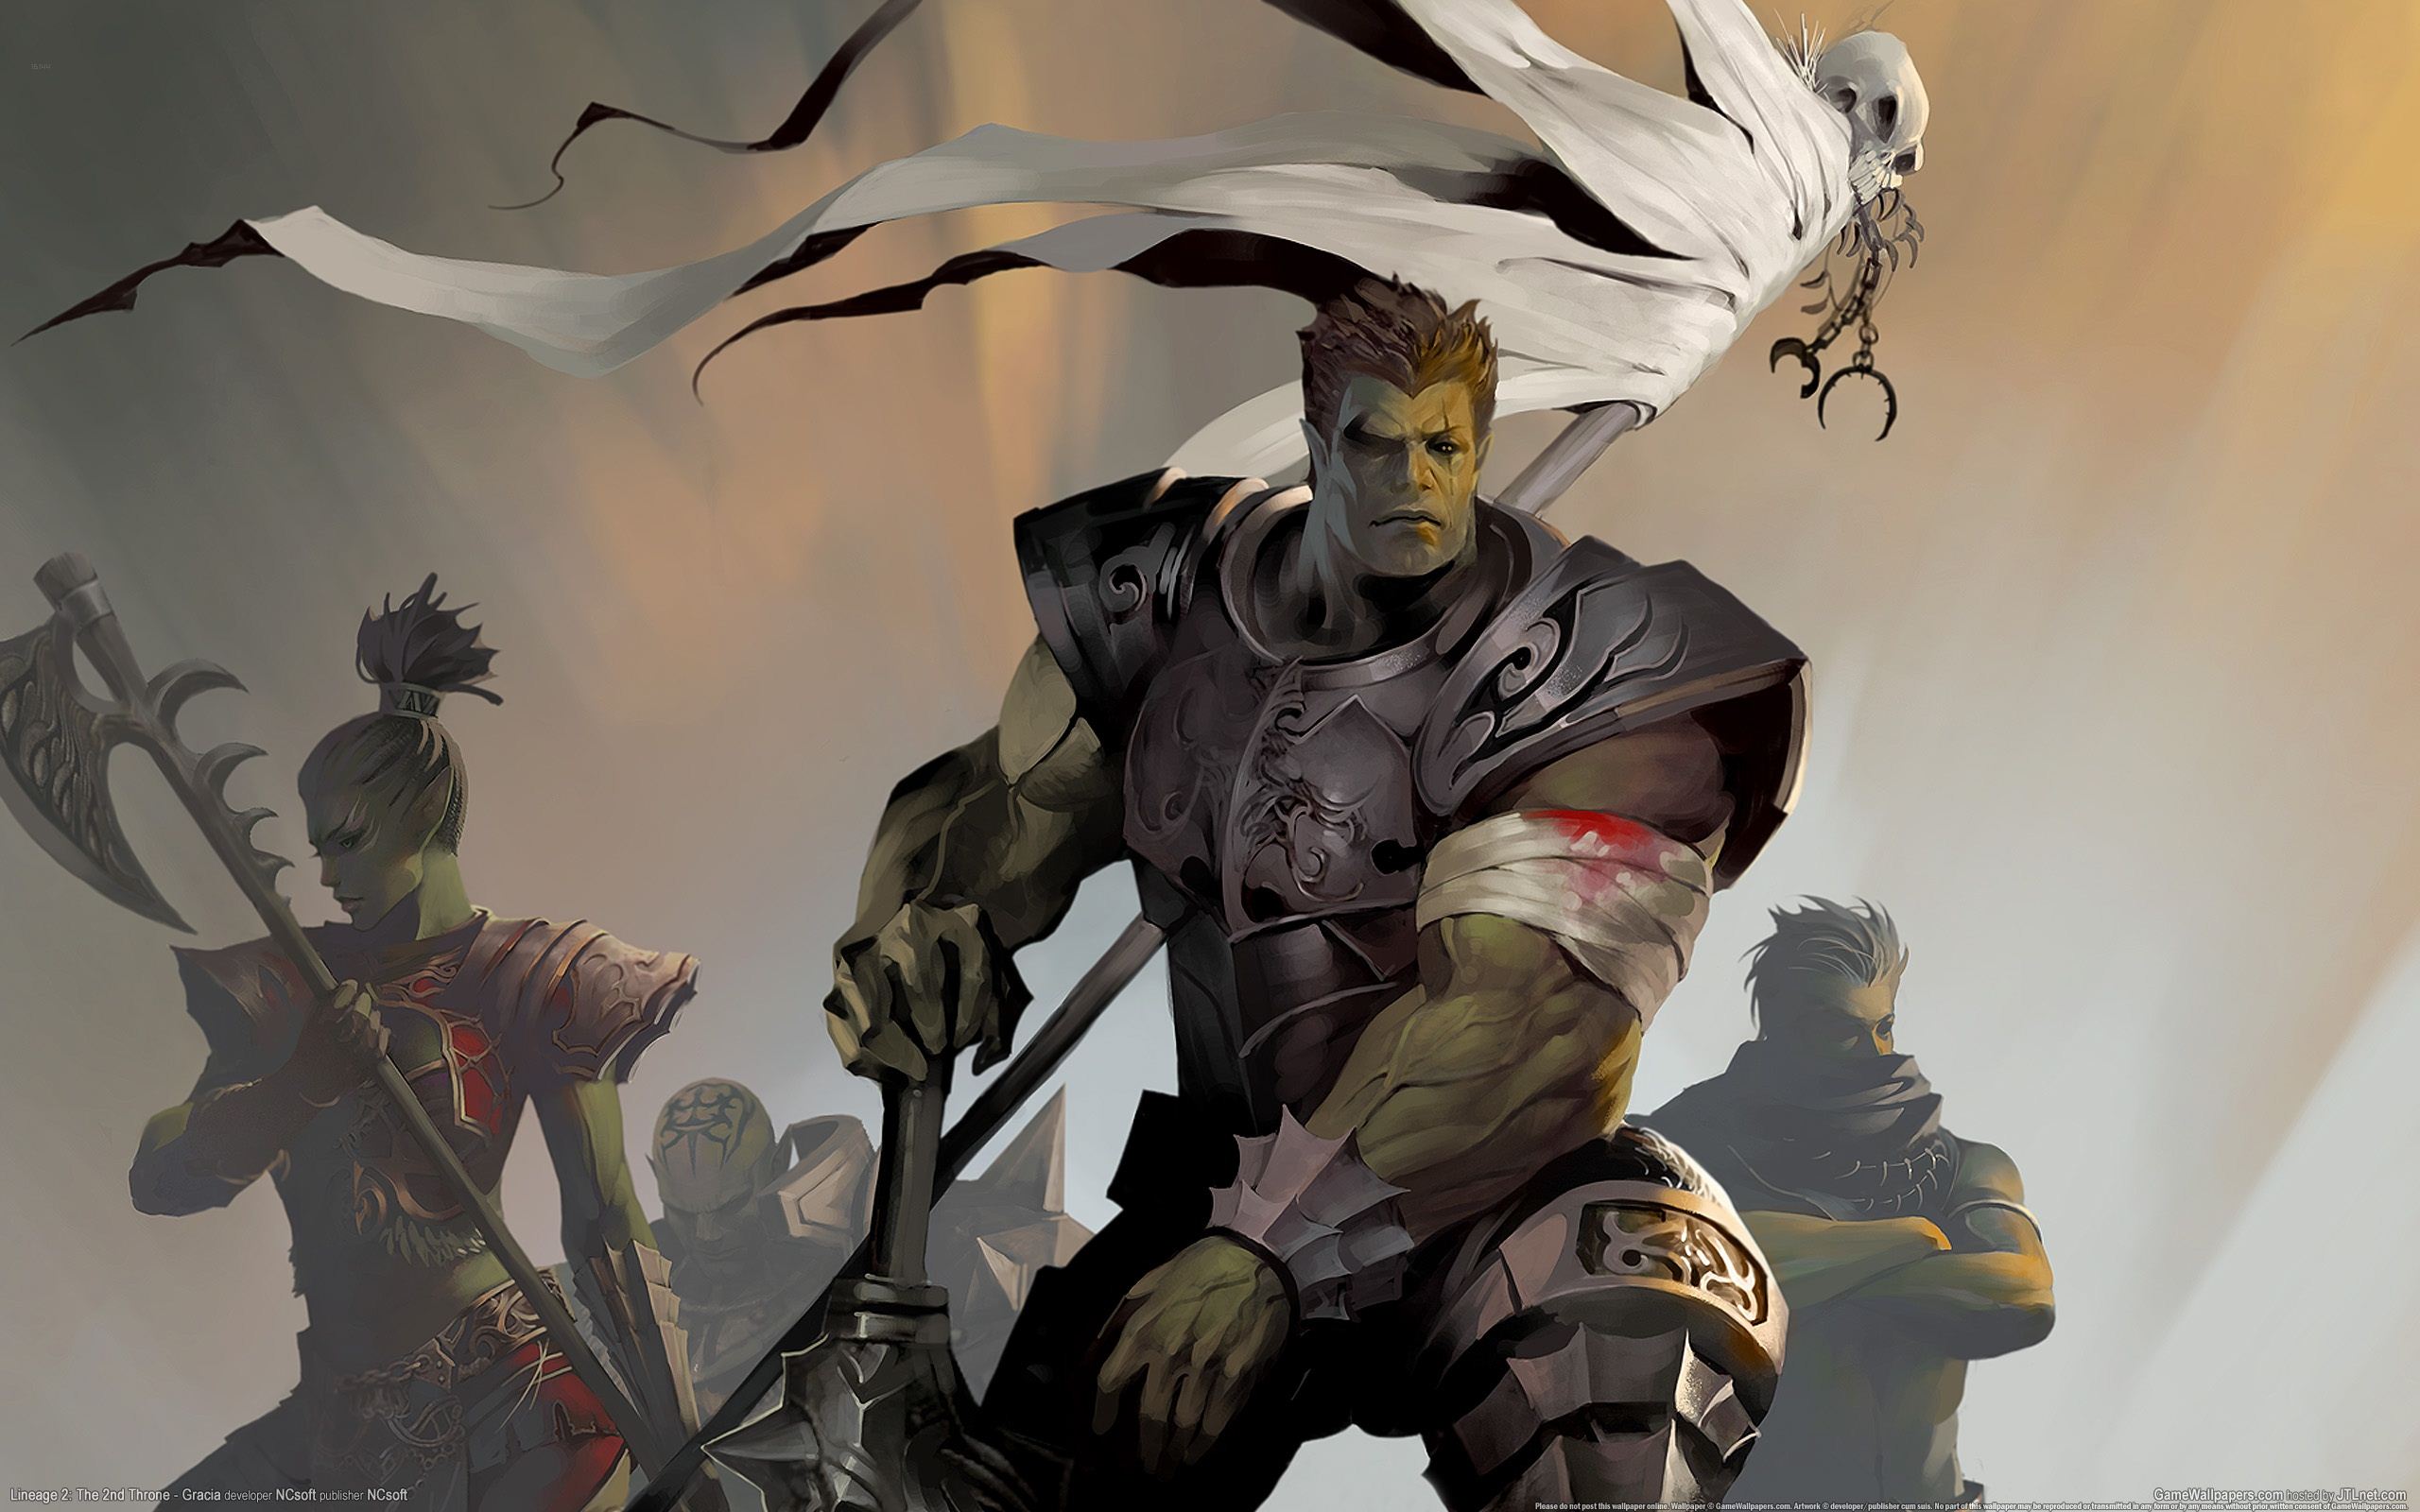 A formidable orc warrior wields an axe and sword, representing a fierce lineage clan in a video game.